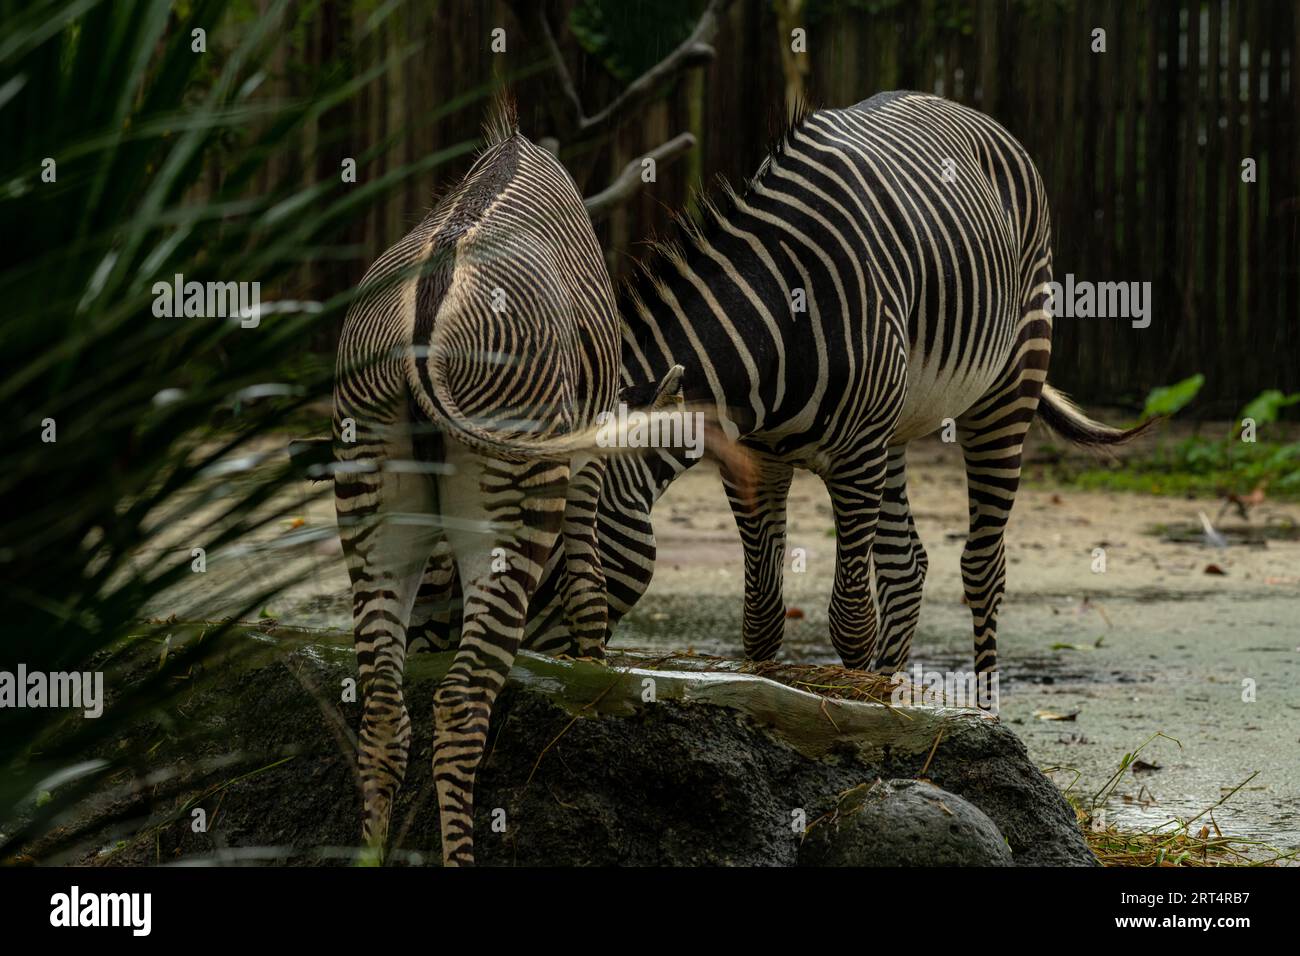 Beautiful zebra animals are eating grass, mother and child zebras are eating green lawn grass in the zoo, copy space for text Stock Photo